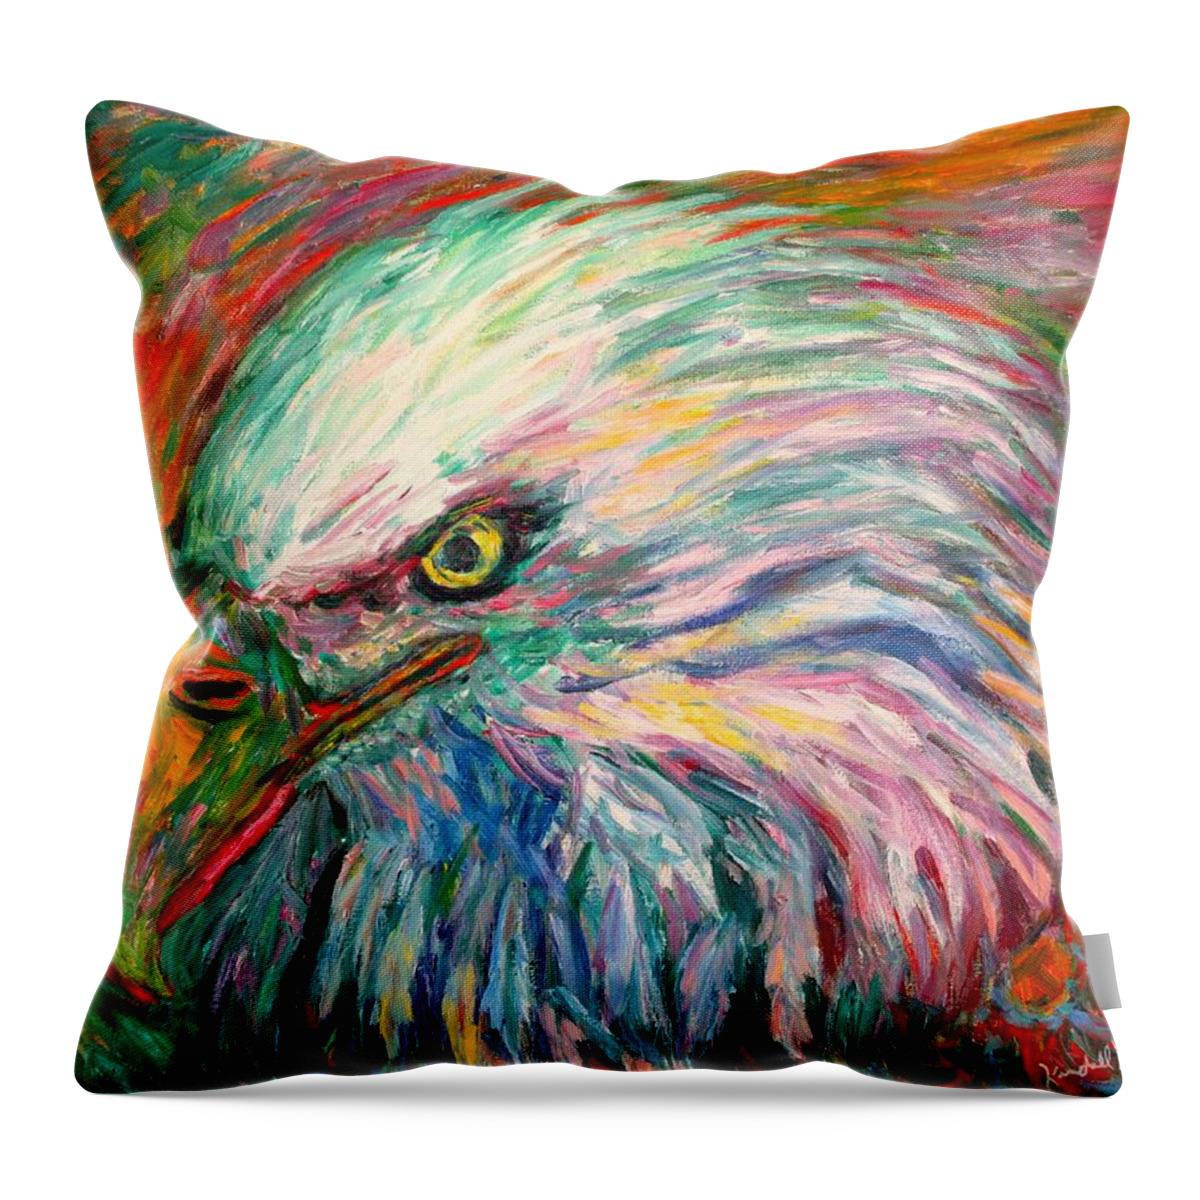 Abstract Eagle Throw Pillow featuring the painting Eagle Fire by Kendall Kessler